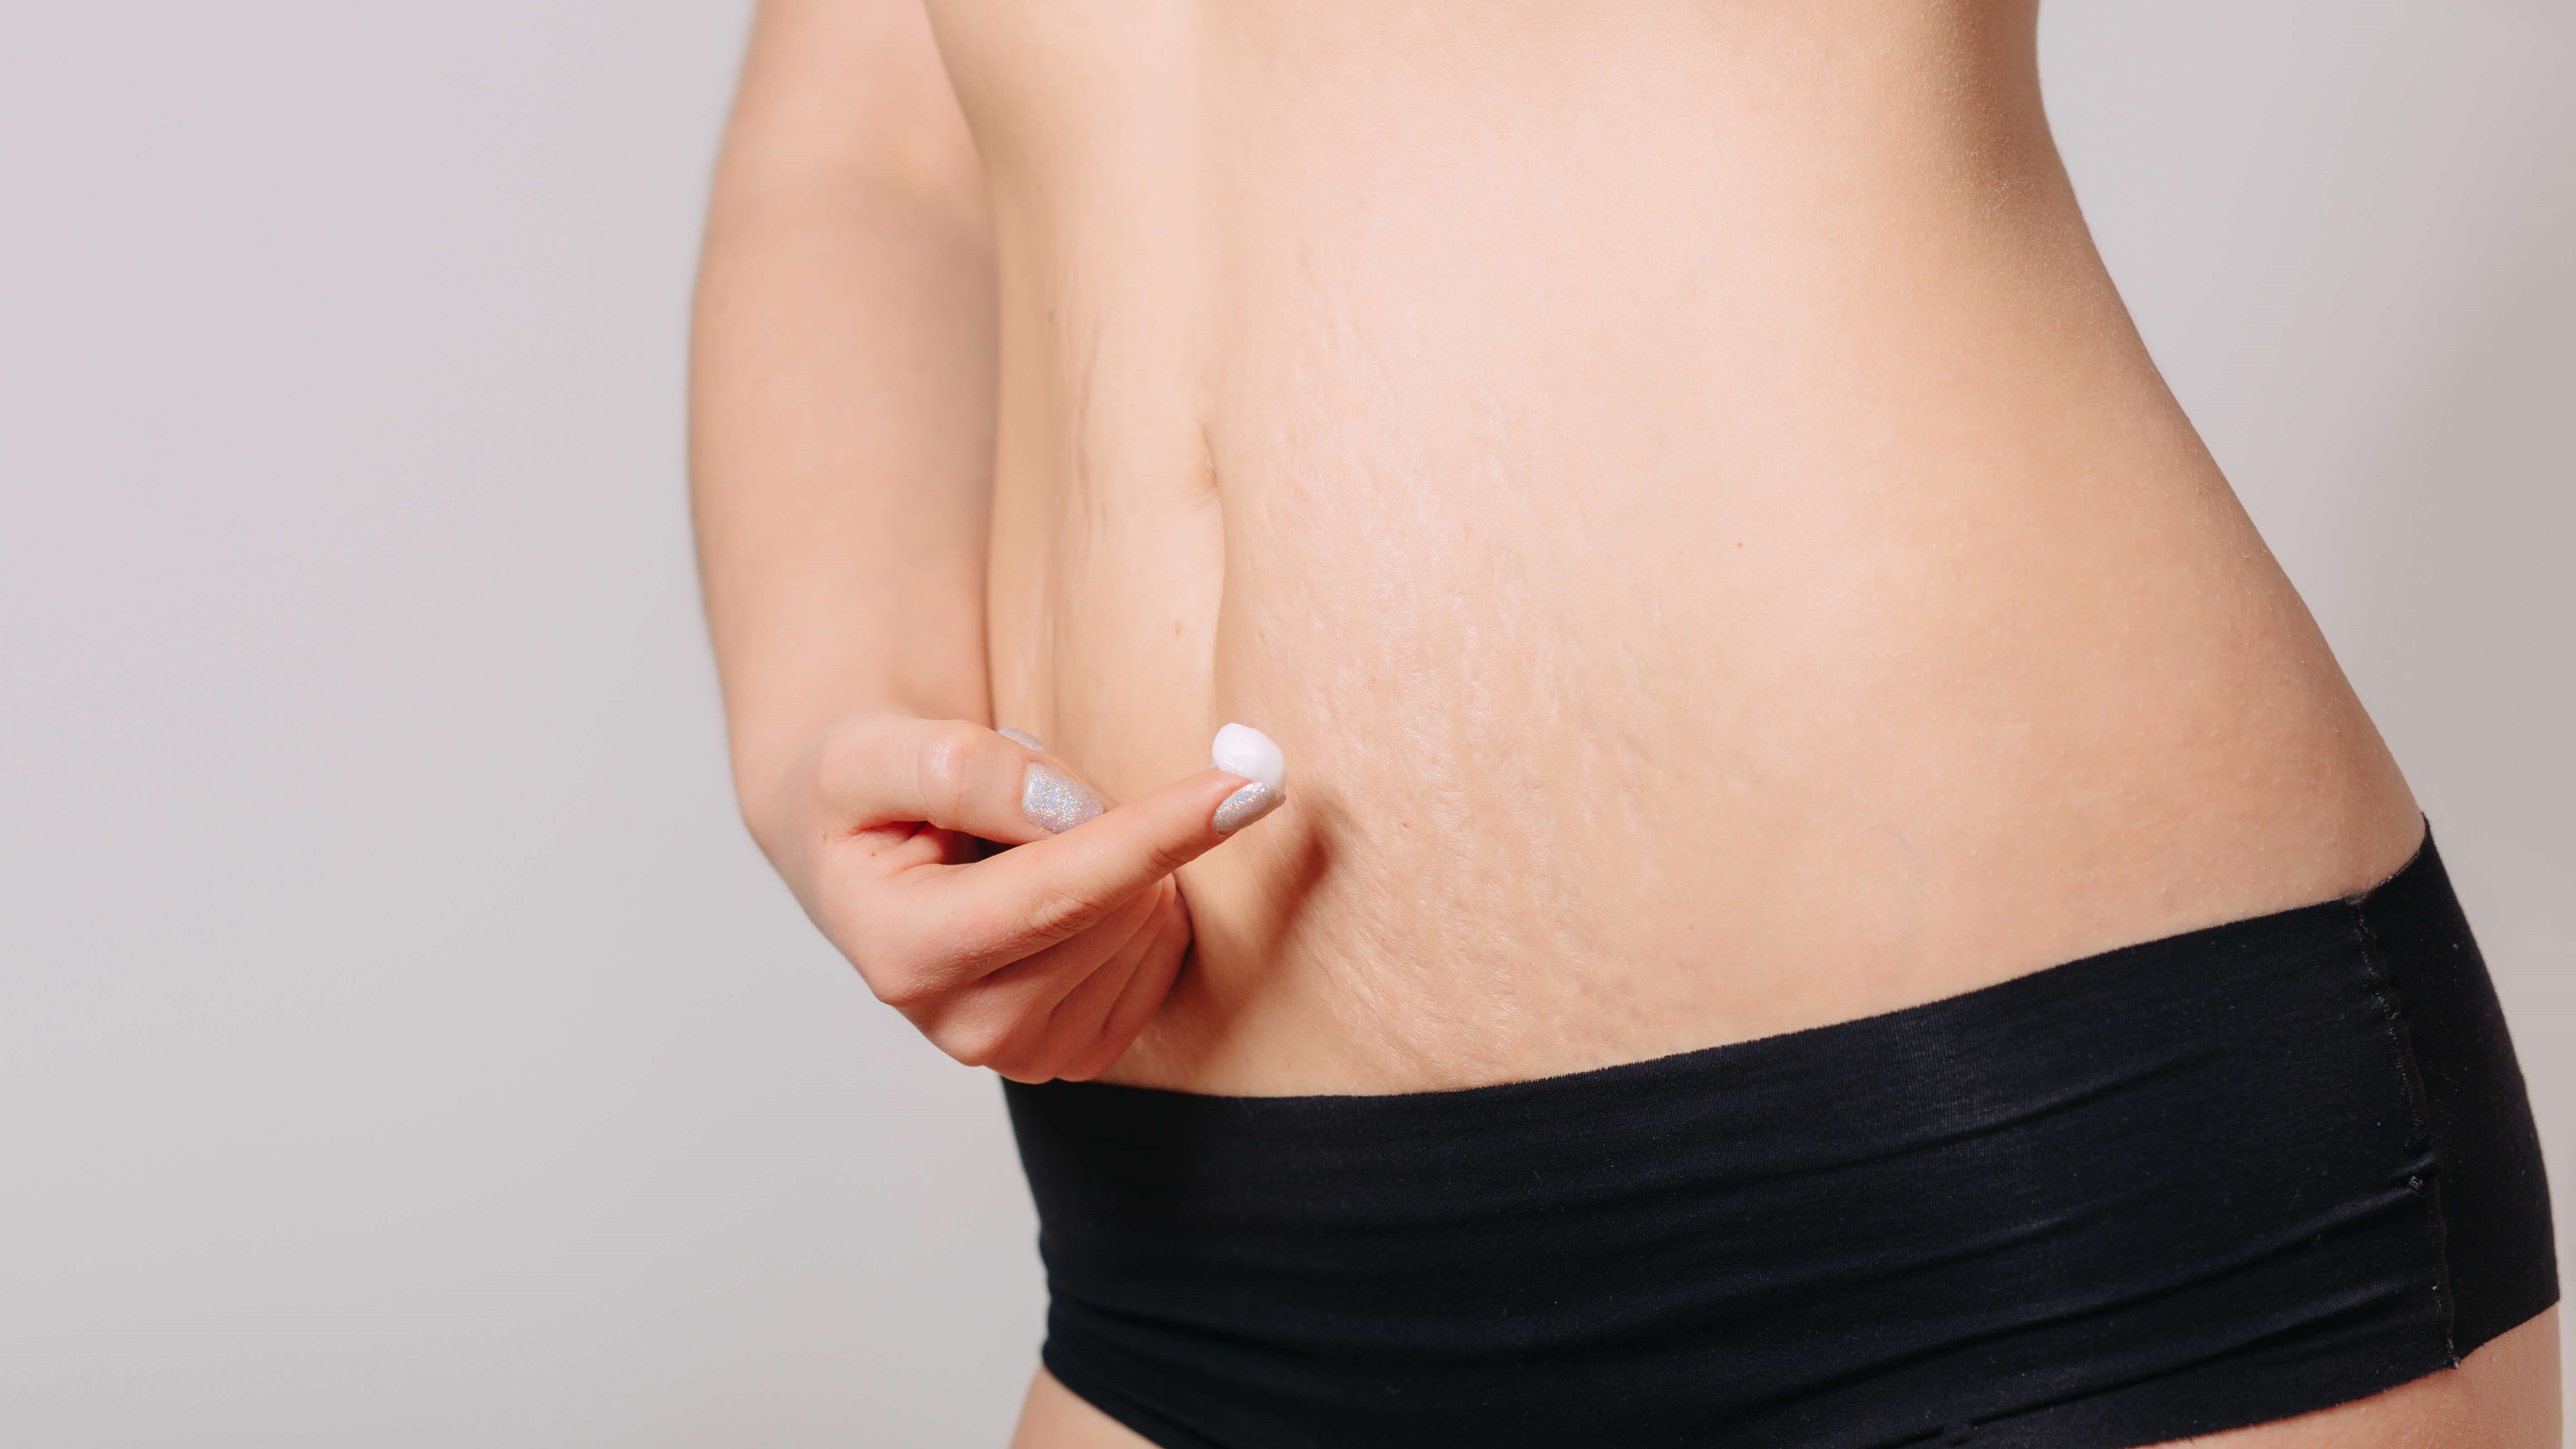 Does Nonsurgical Skin Tightening Work on Loose Skin Around the Waist?